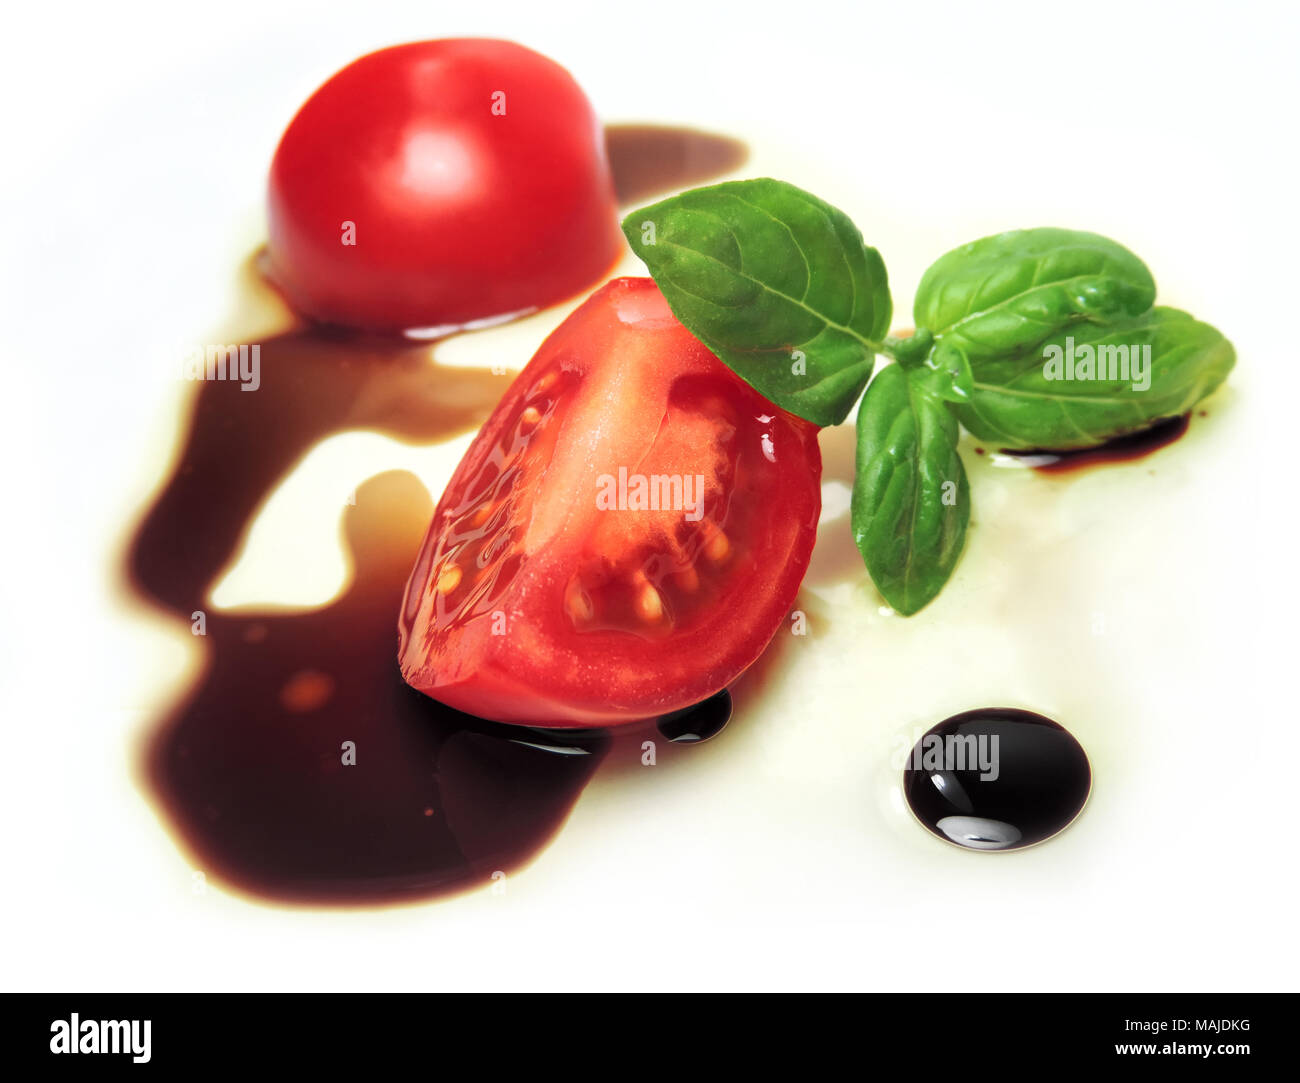 Cherry tomato with oil and vinegar, isolated on white background and decorated with basil leaf. Tomato slice and aceito balsamico. Italian food. Stock Photo